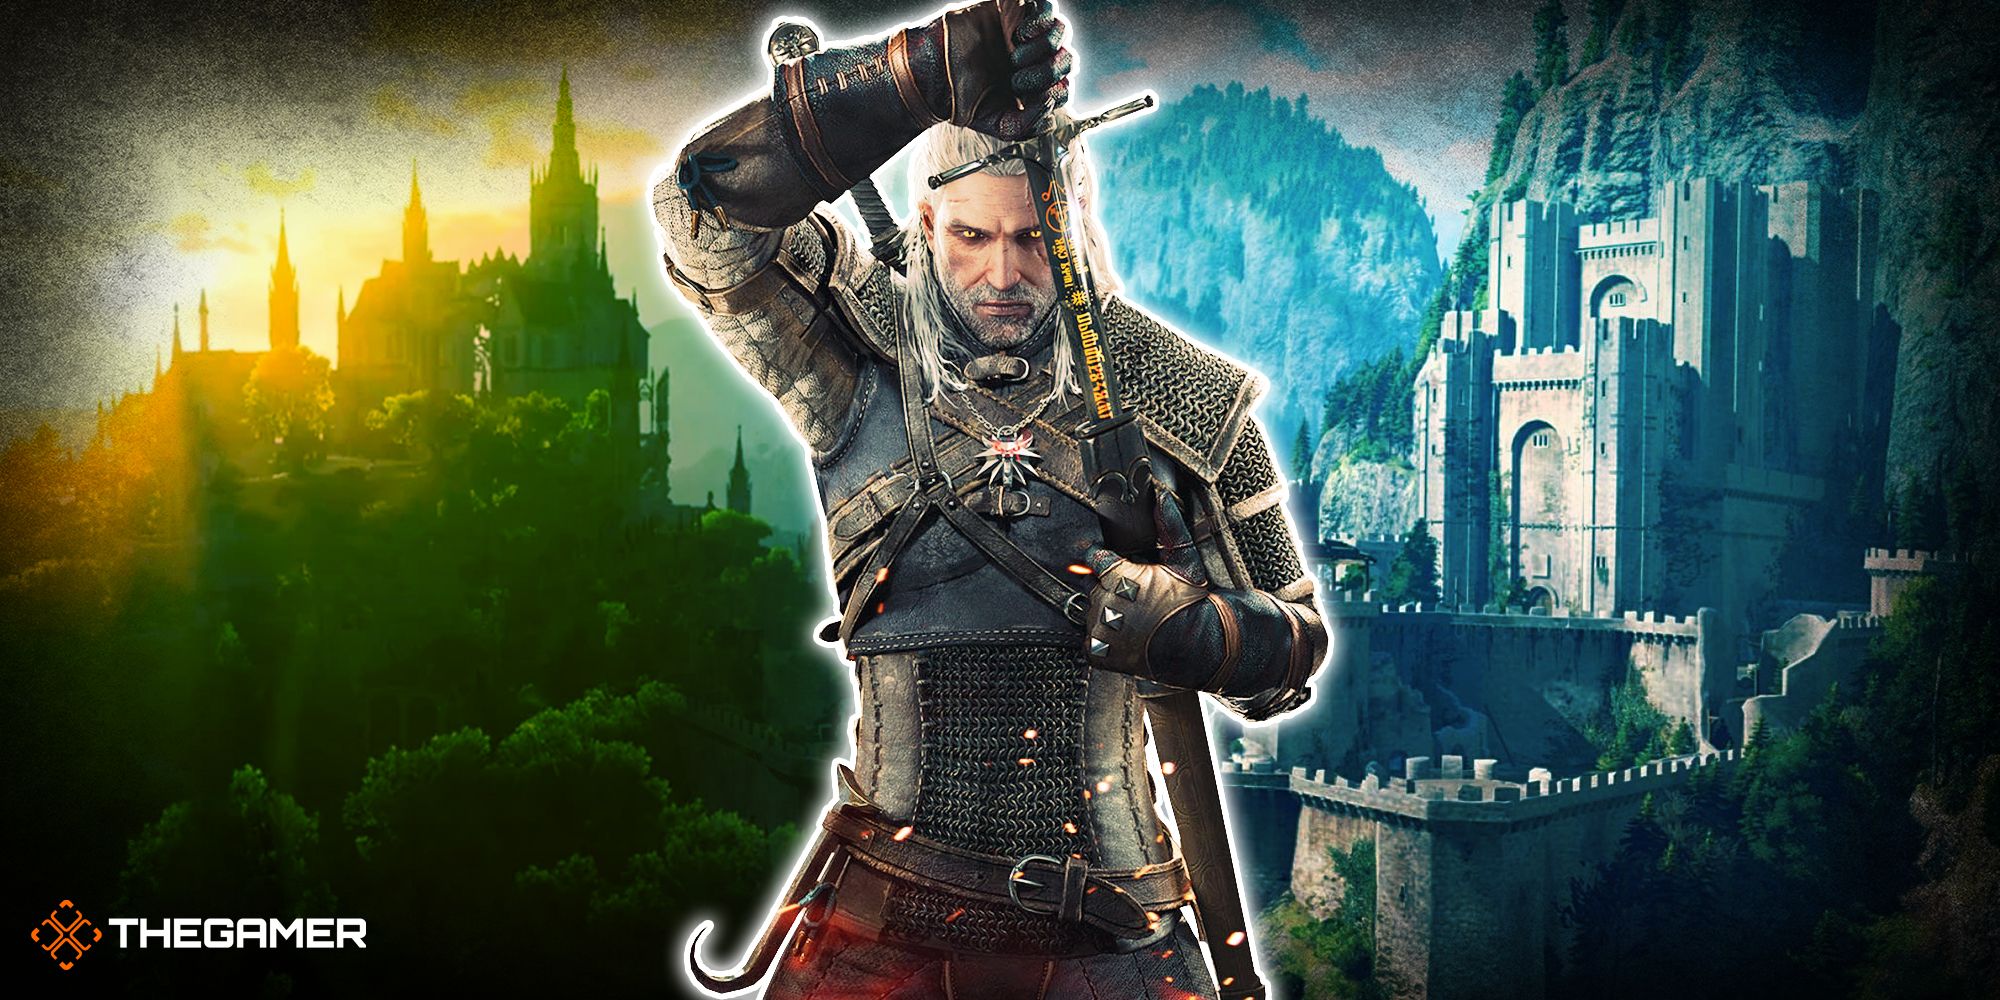 Game art and screens from The Witcher.